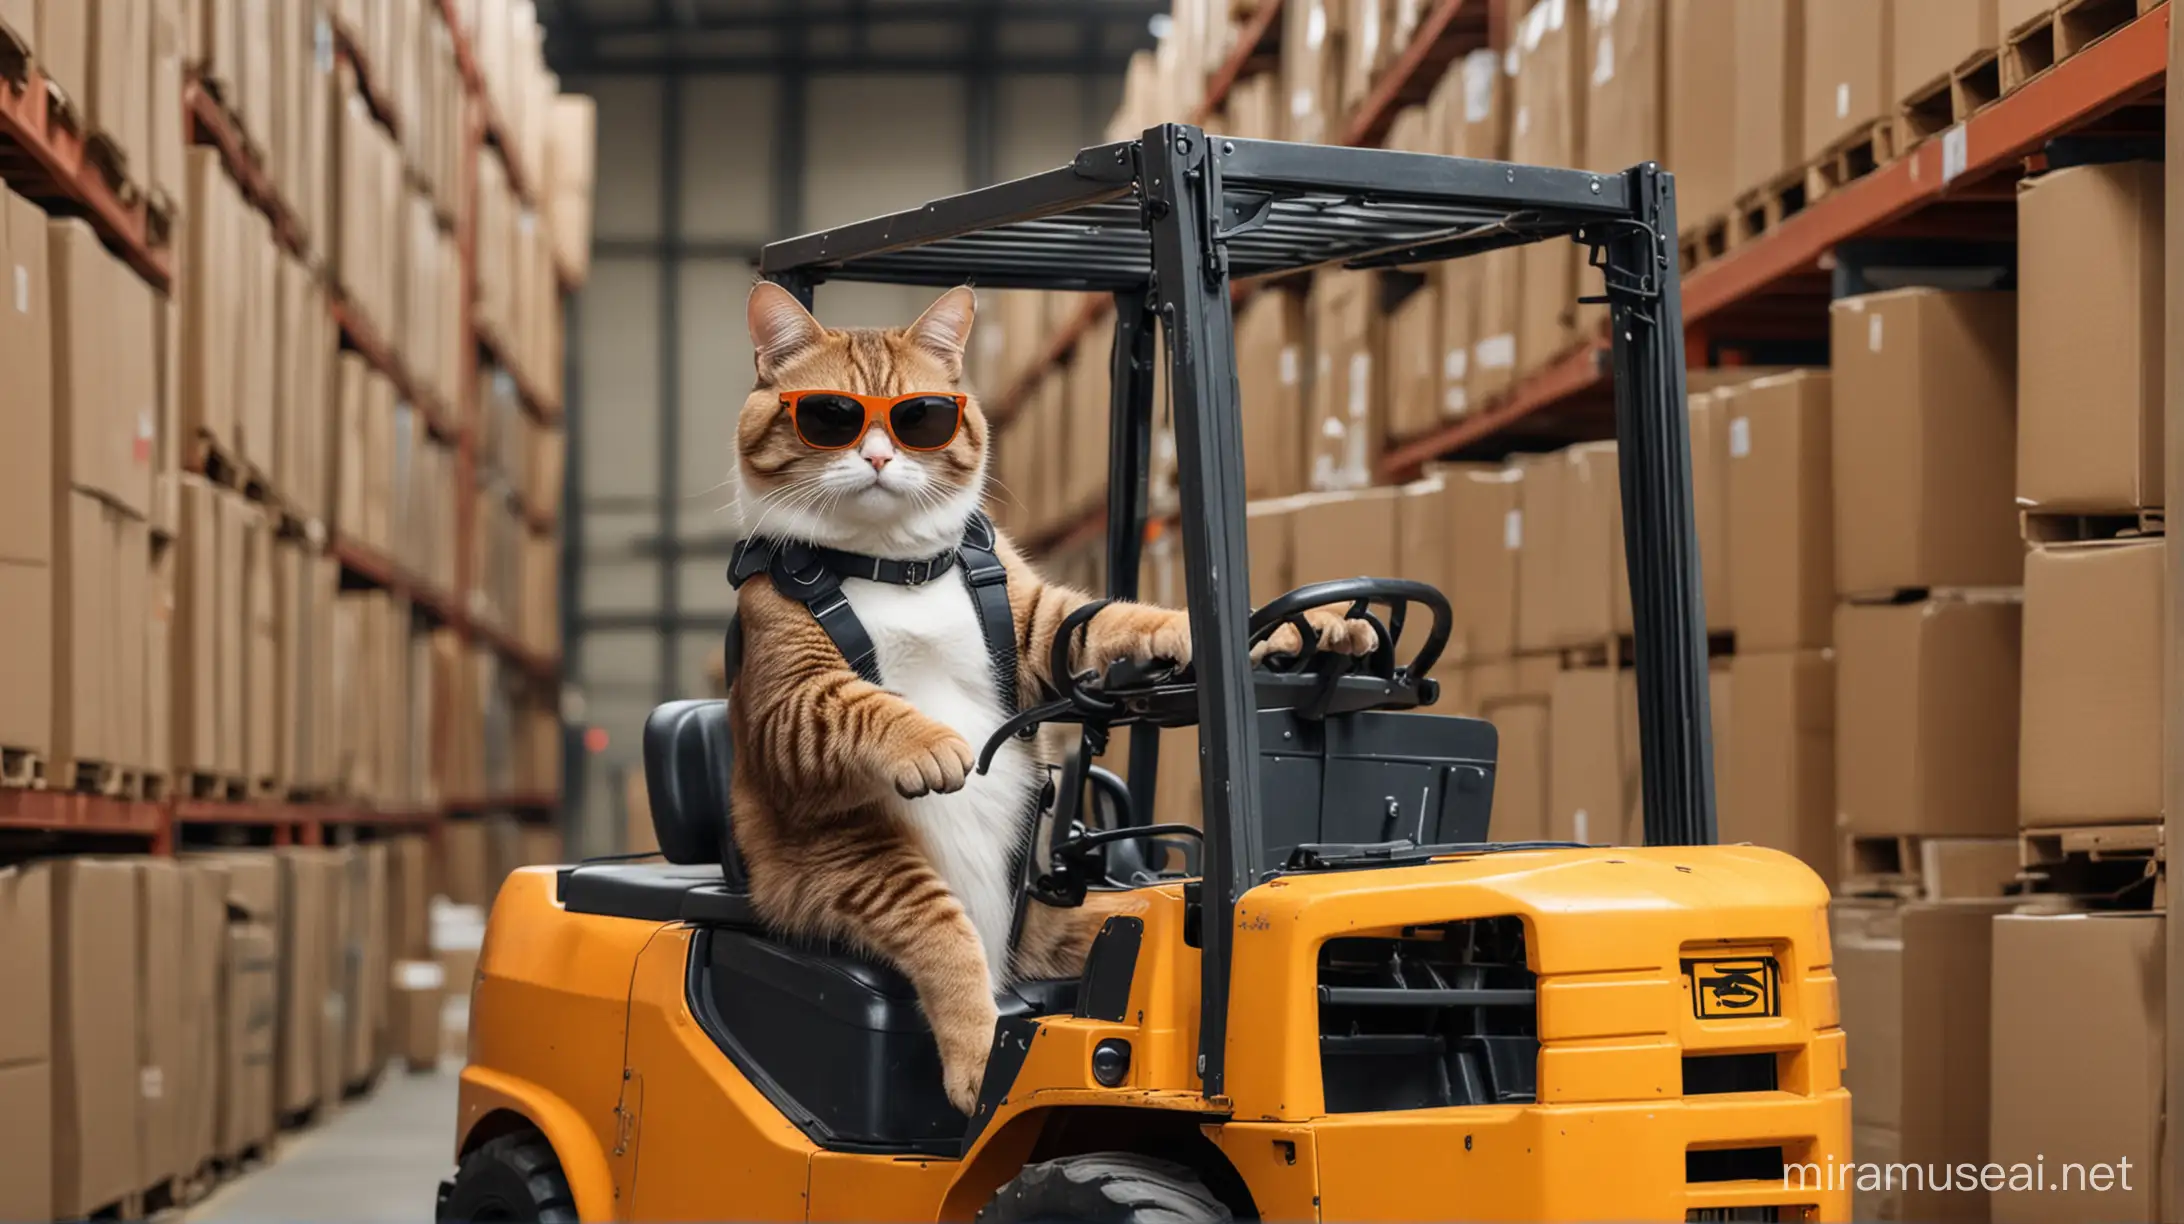 A cool cat in sunglasses riding a forklift in a warehouse . Full figure